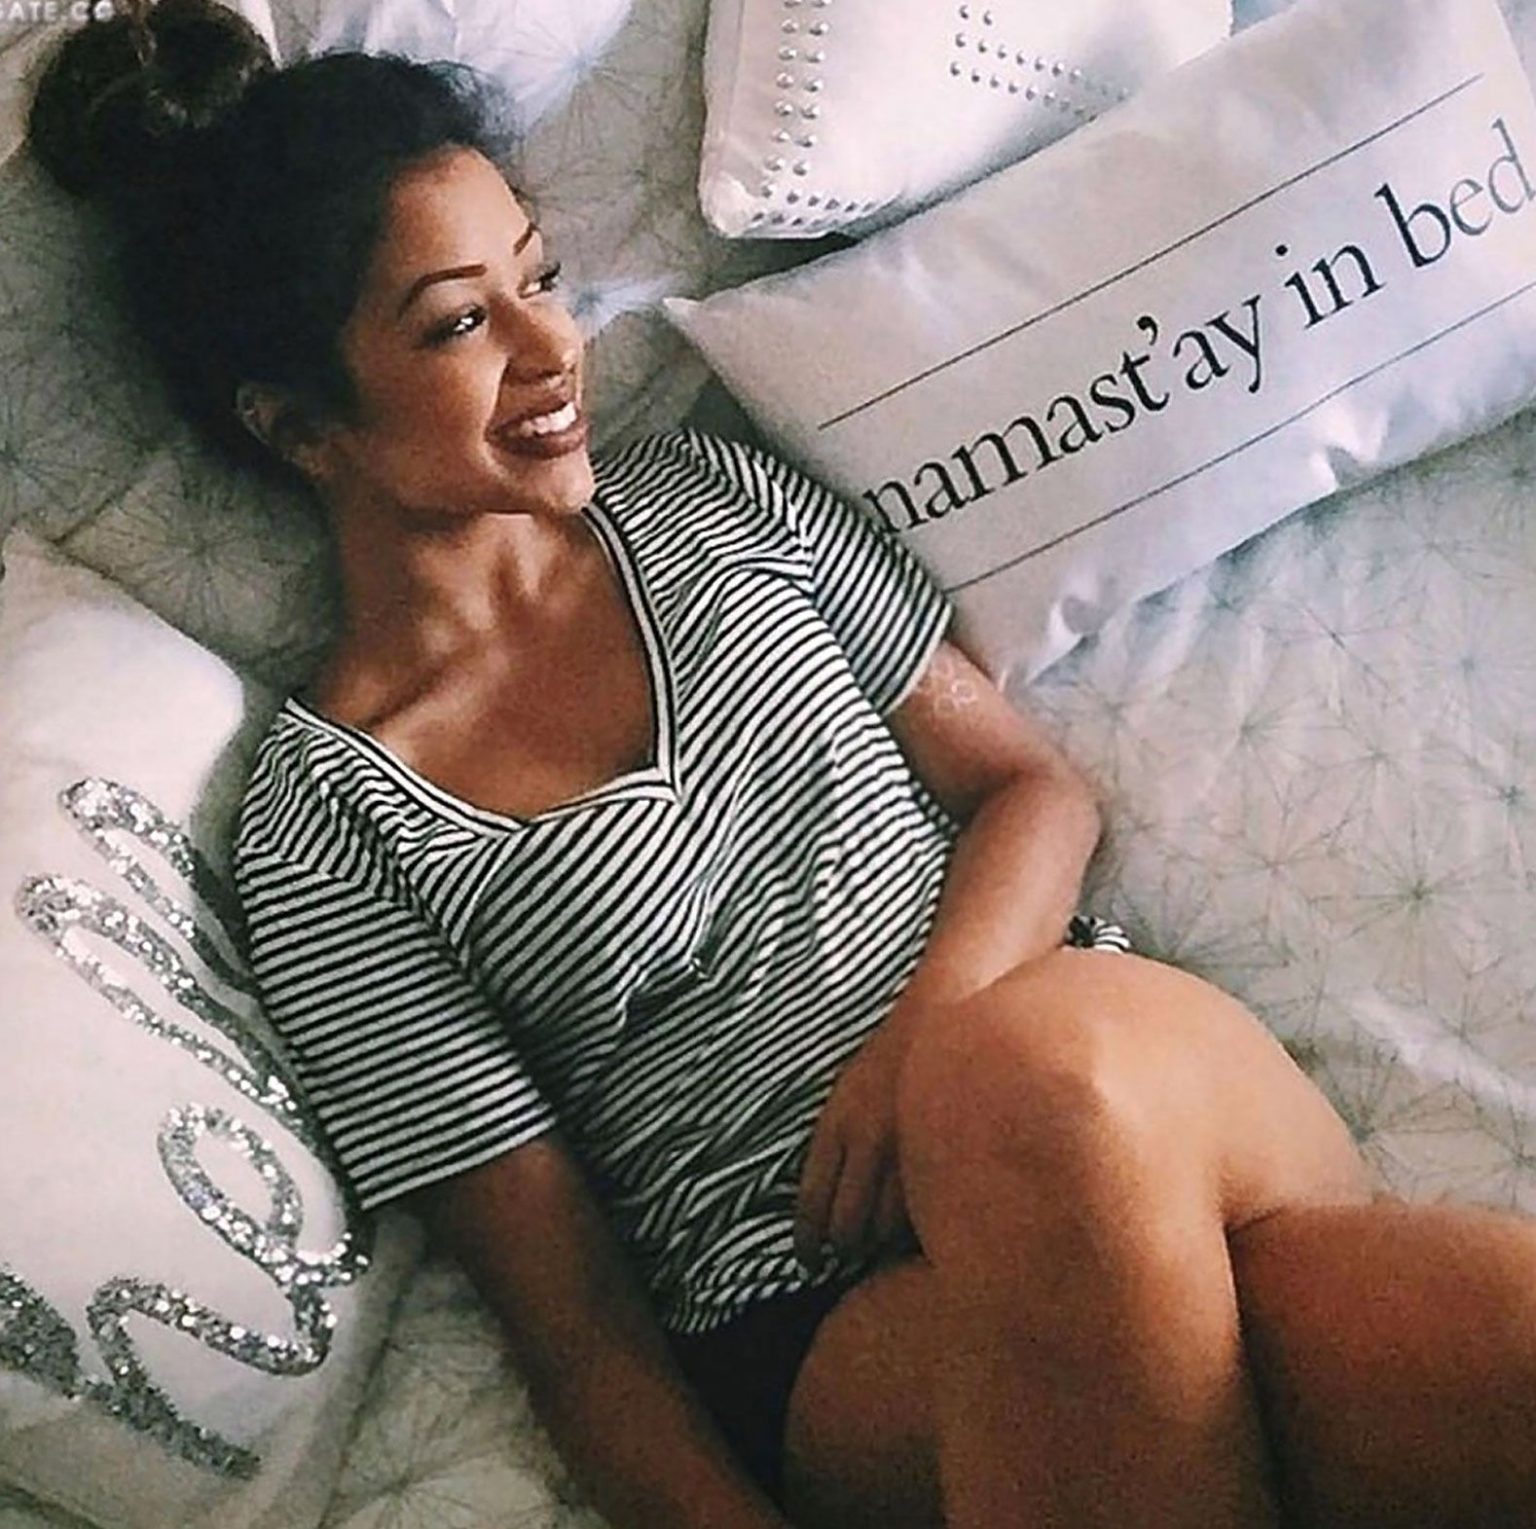 Liza Koshy Nude And Sexy 56 Private Photos And Video Thefappening